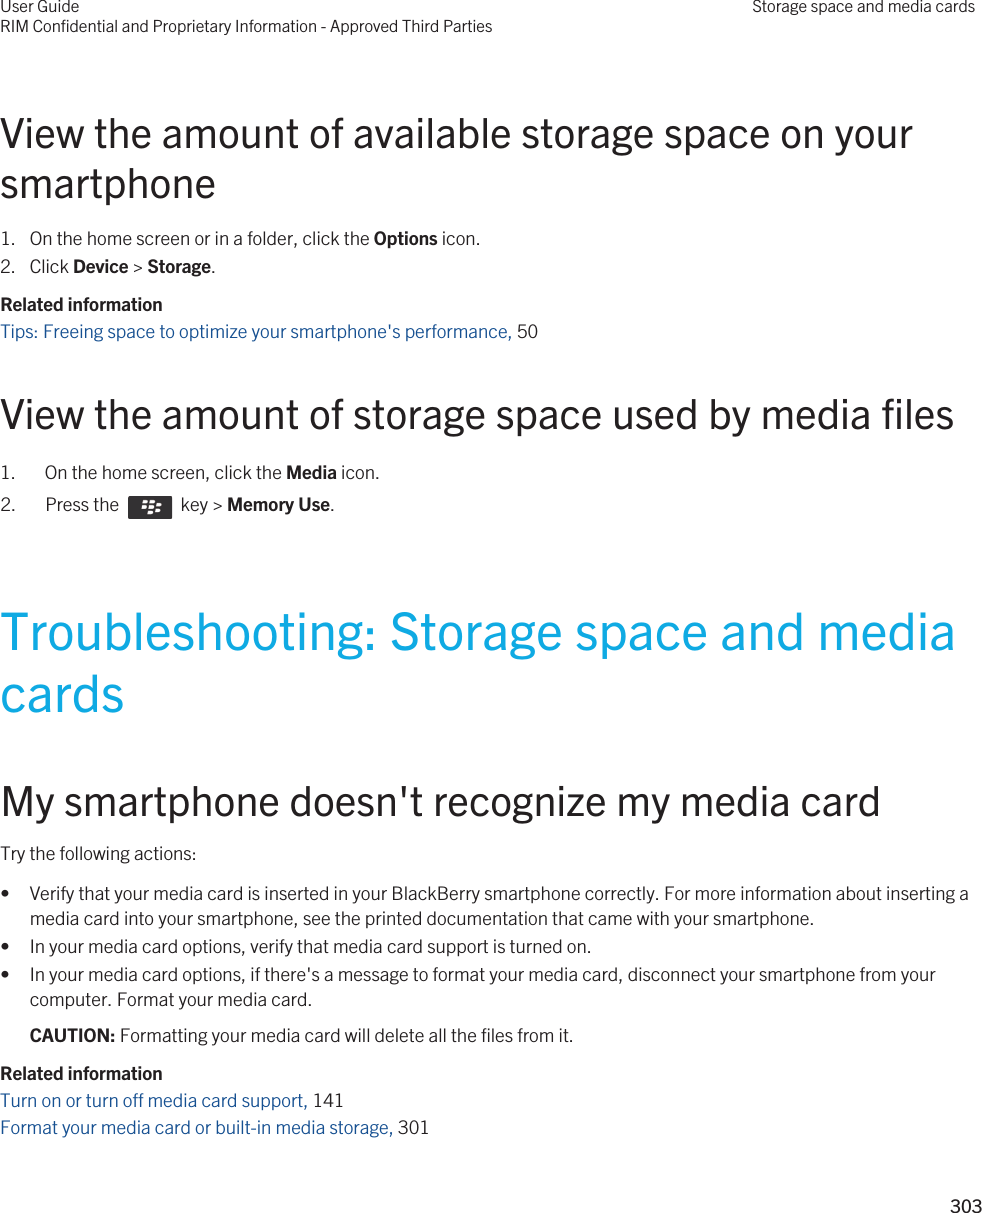 View the amount of available storage space on your smartphone1. On the home screen or in a folder, click the Options icon.2. Click Device &gt; Storage.Related informationTips: Freeing space to optimize your smartphone&apos;s performance, 50 View the amount of storage space used by media files1. On the home screen, click the Media icon.2.  Press the    key &gt; Memory Use. Troubleshooting: Storage space and media cardsMy smartphone doesn&apos;t recognize my media cardTry the following actions:• Verify that your media card is inserted in your BlackBerry smartphone correctly. For more information about inserting a media card into your smartphone, see the printed documentation that came with your smartphone.• In your media card options, verify that media card support is turned on.• In your media card options, if there&apos;s a message to format your media card, disconnect your smartphone from your computer. Format your media card.CAUTION: Formatting your media card will delete all the files from it.Related informationTurn on or turn off media card support, 141 Format your media card or built-in media storage, 301 User GuideRIM Confidential and Proprietary Information - Approved Third PartiesStorage space and media cards303 